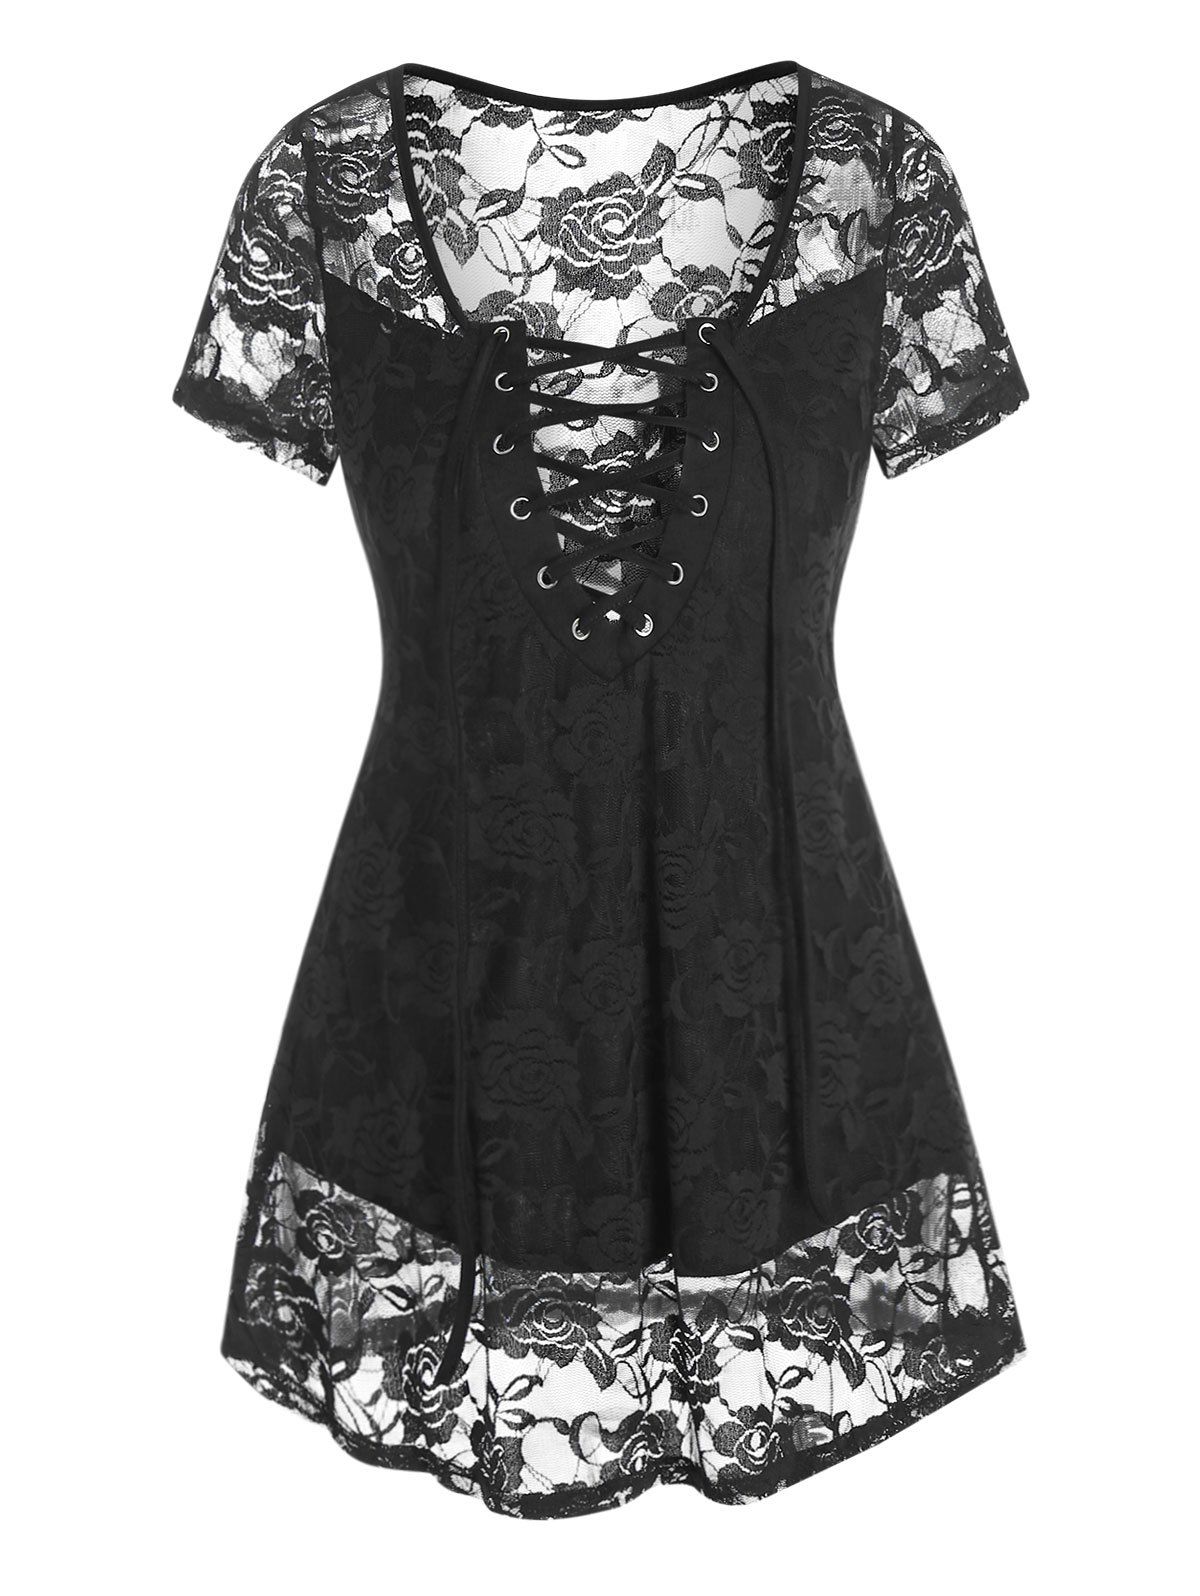 Floral Lace Sheer Lace Up Curved Hem See Through Top - BLACK S